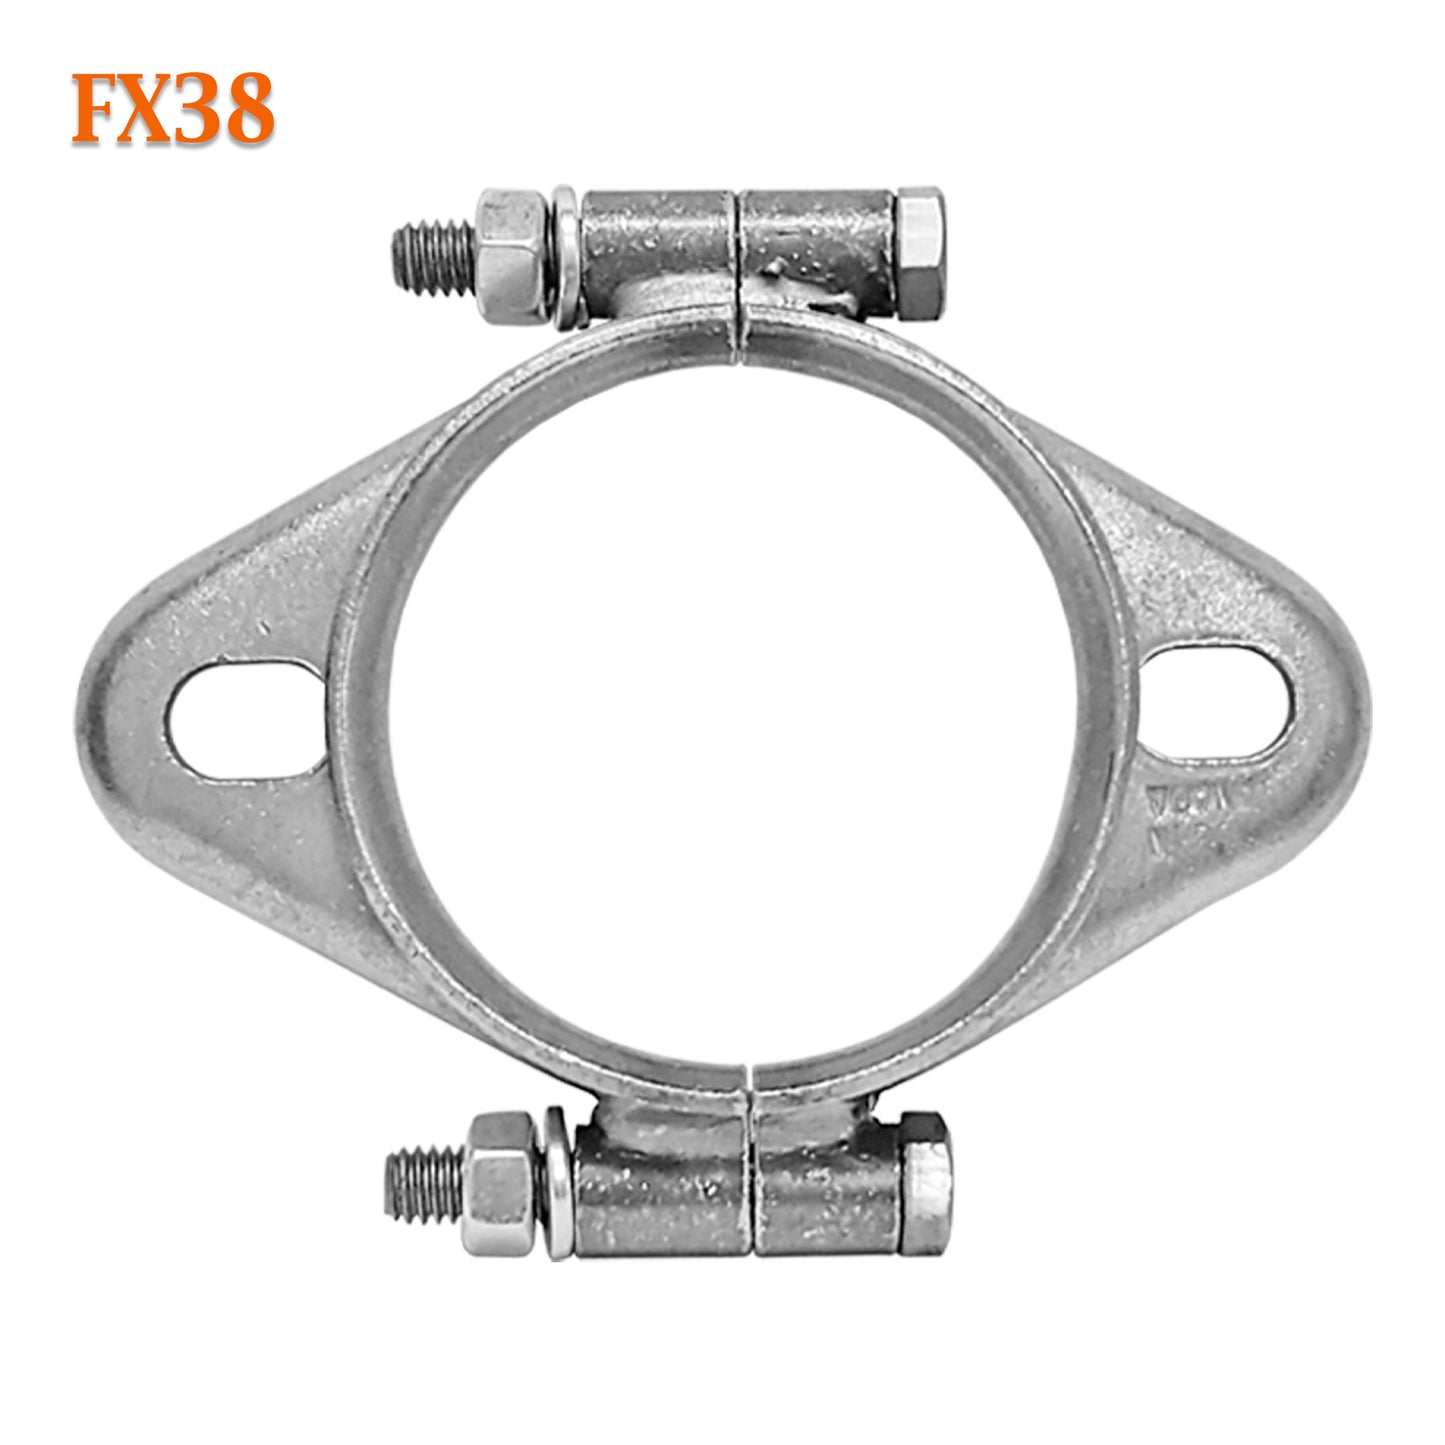 FX38 2 5/8" ID Exhaust Flange Formed Oval Side Split For 2 1/2" OD Flared Pipe